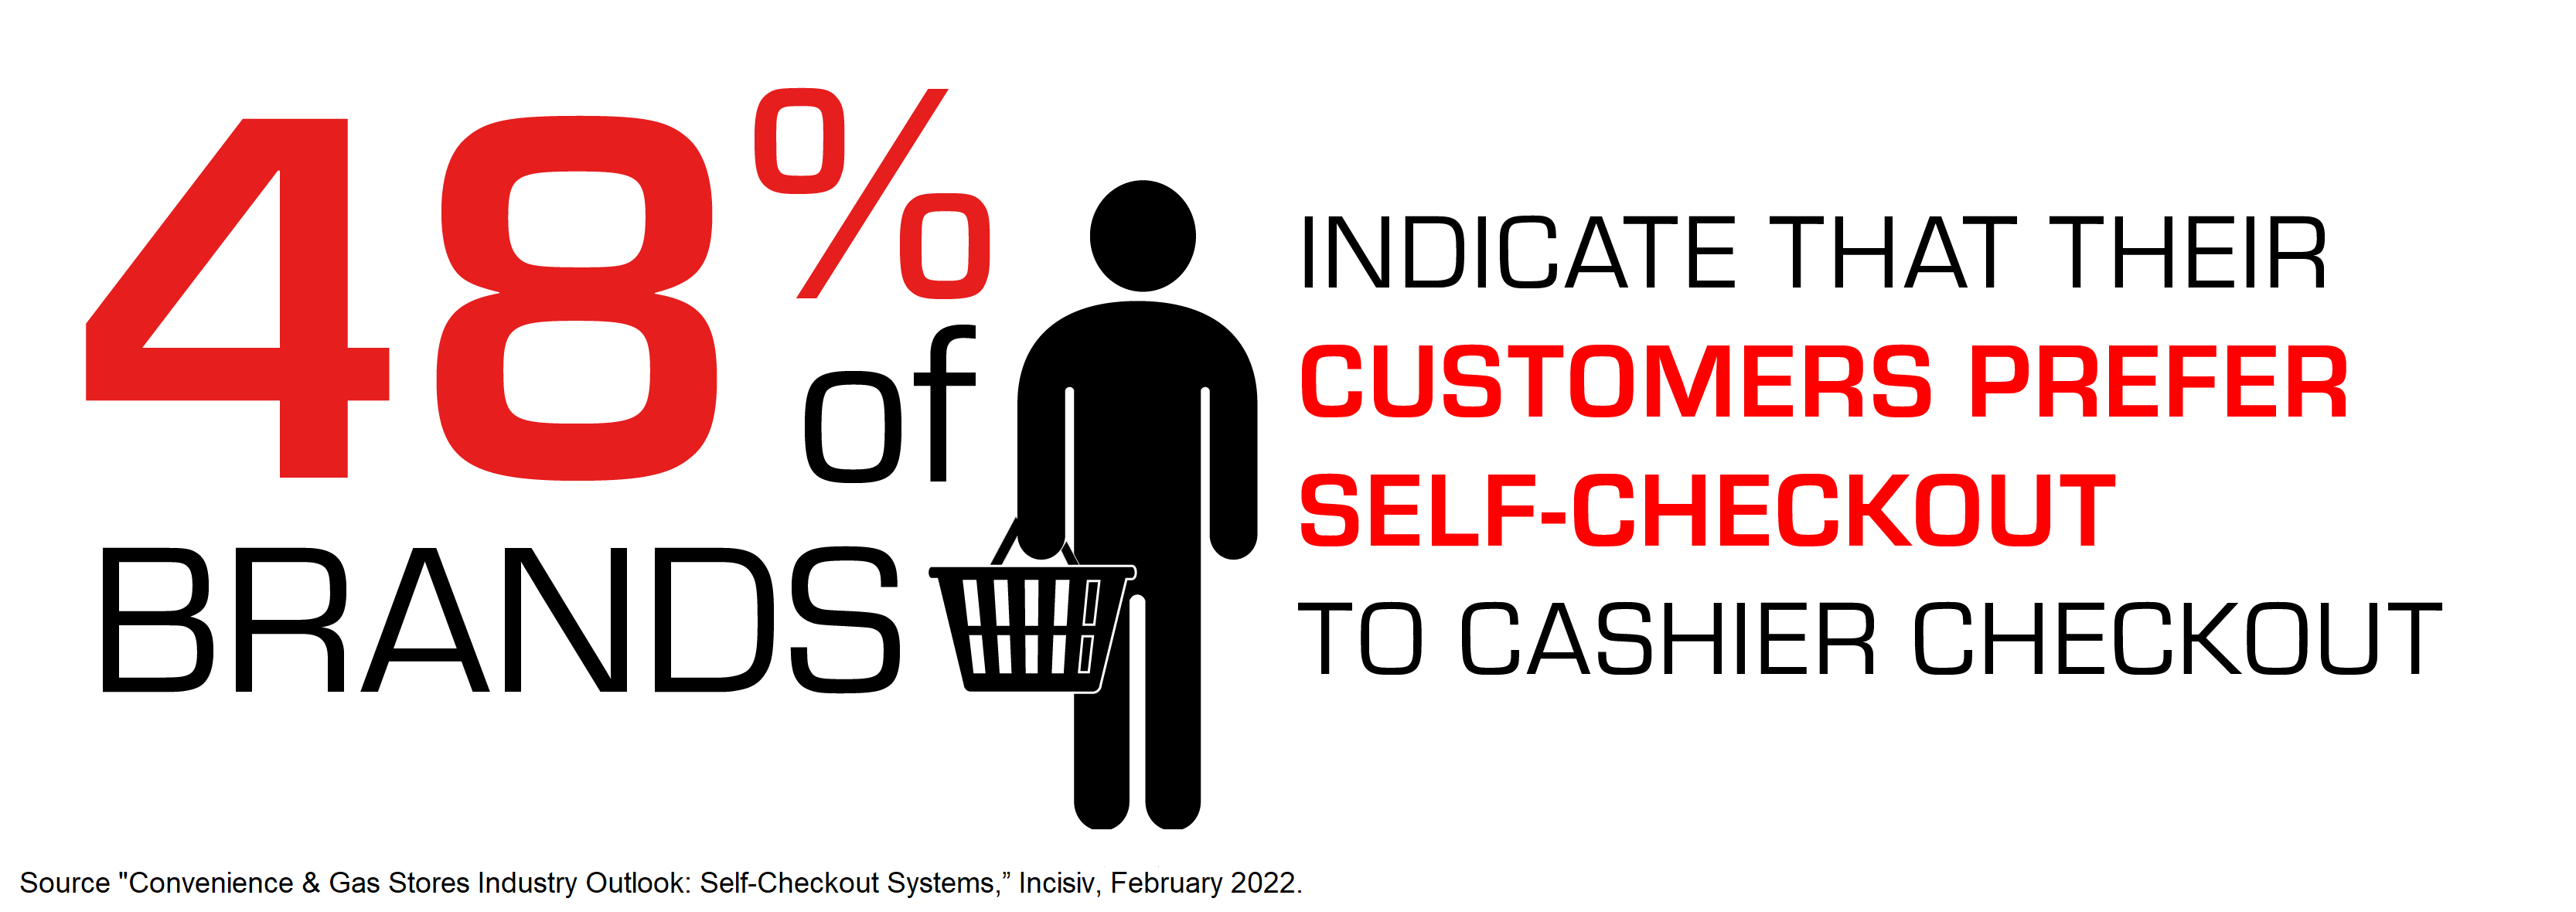 48% of brands indicate that their customer prefer self-checkout to cashier checkout